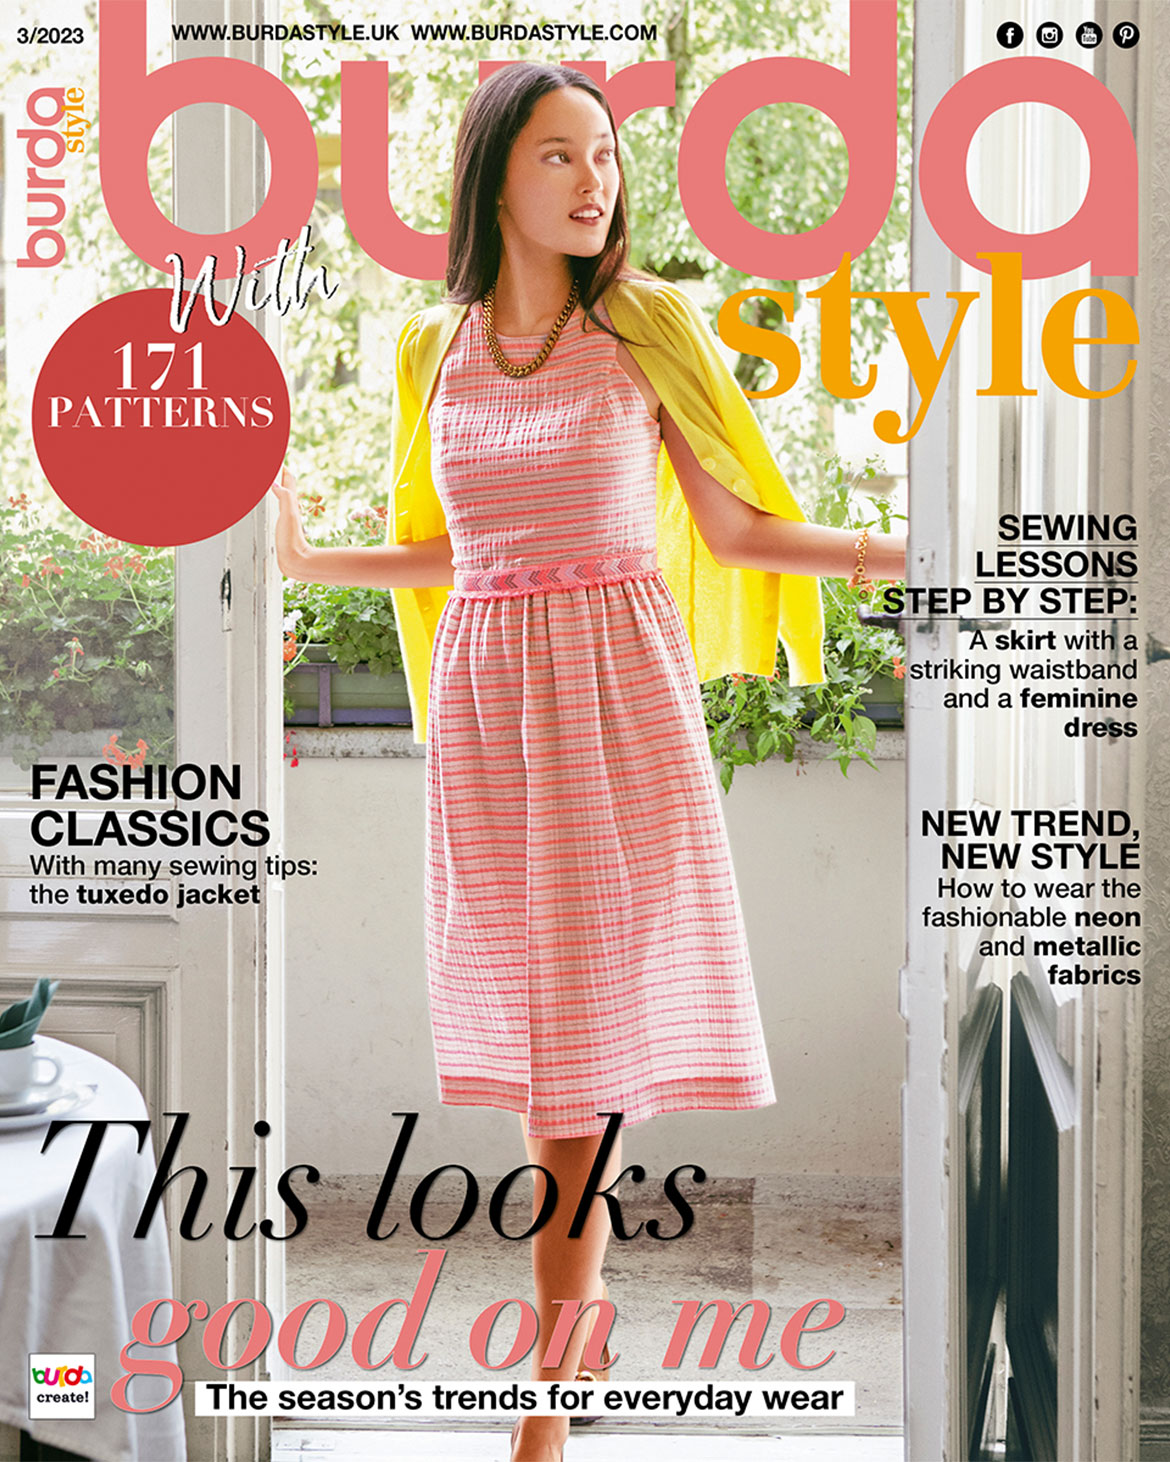 March 2023: The New Issue of Burda Style!